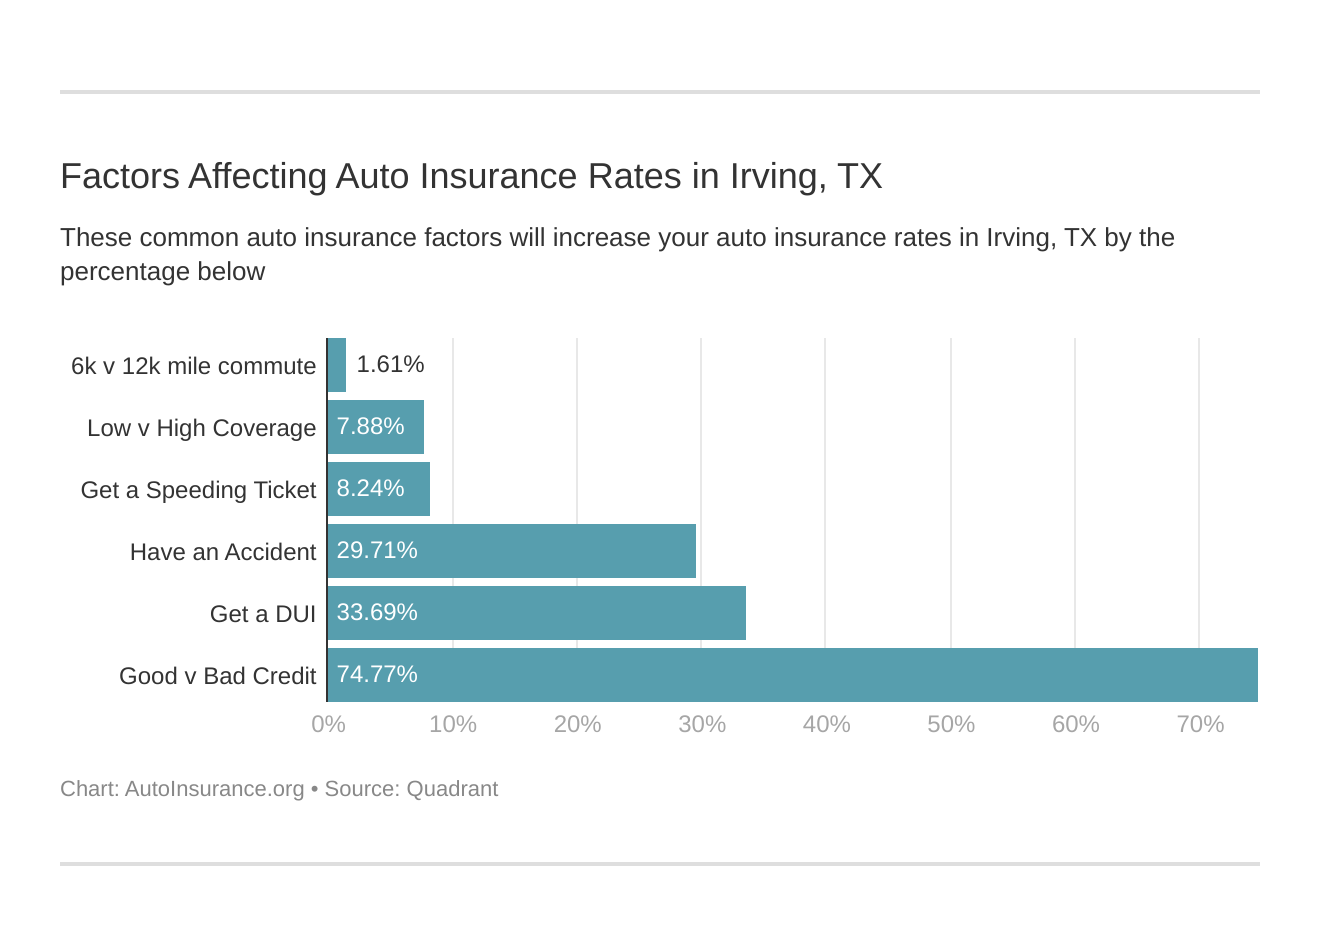 Factors Affecting Auto Insurance Rates in Irving, TX